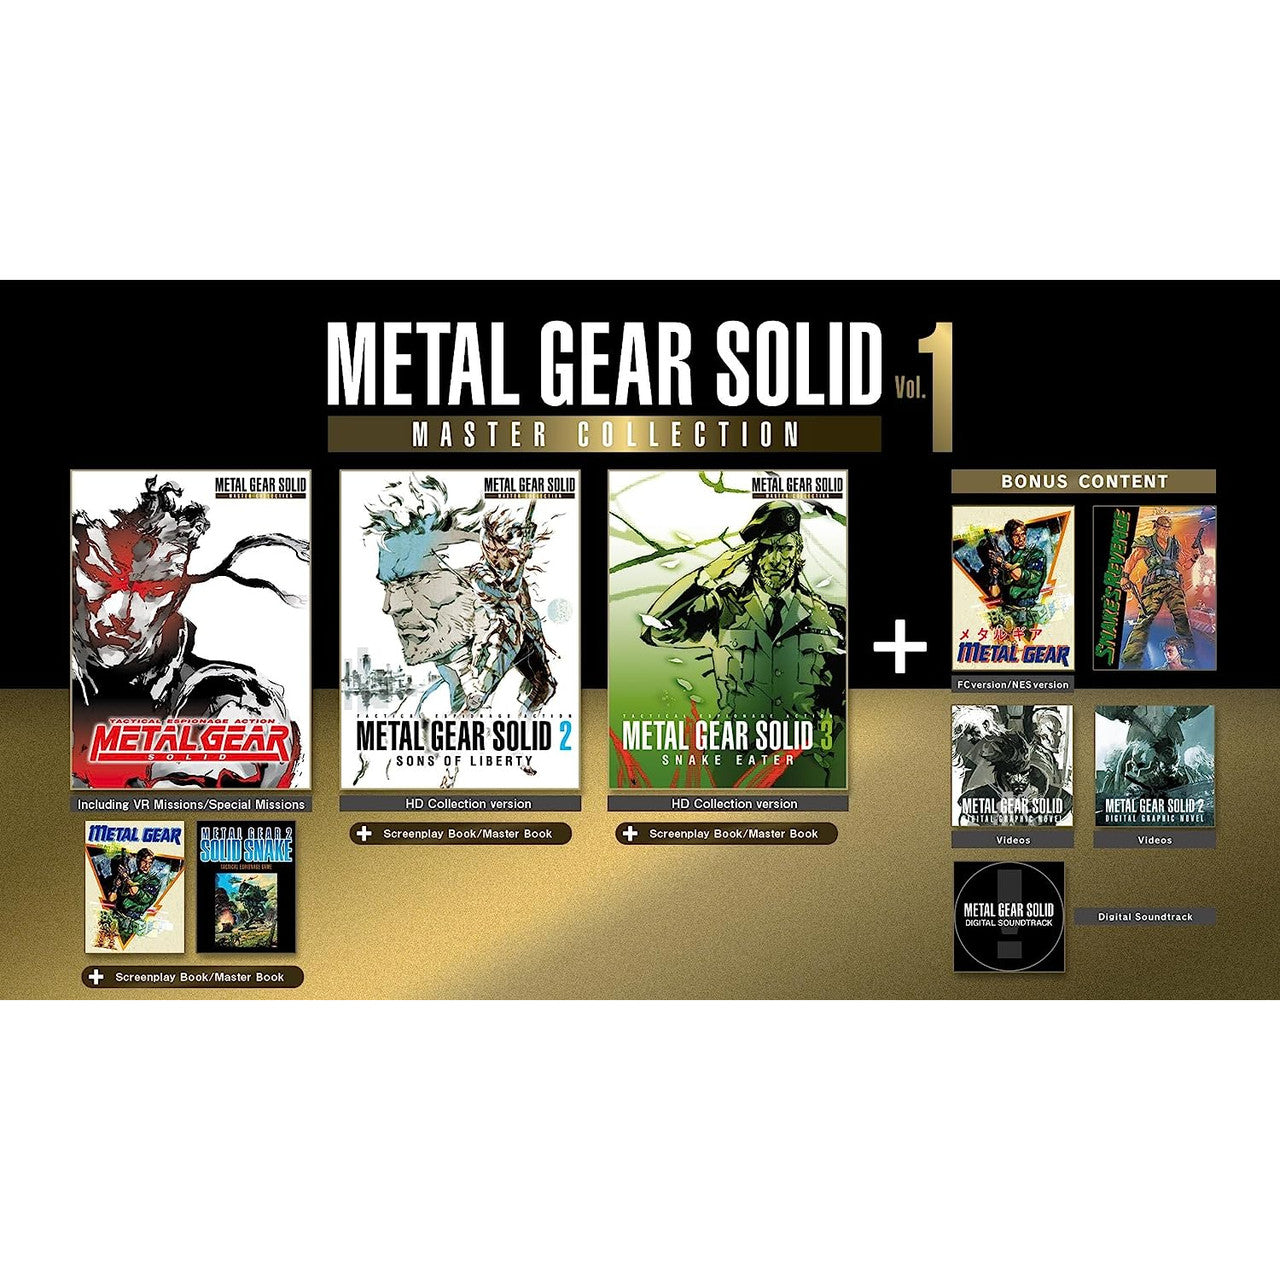 Metal Gear Solid Master Collection Vol. 1 Pre-Order Guide